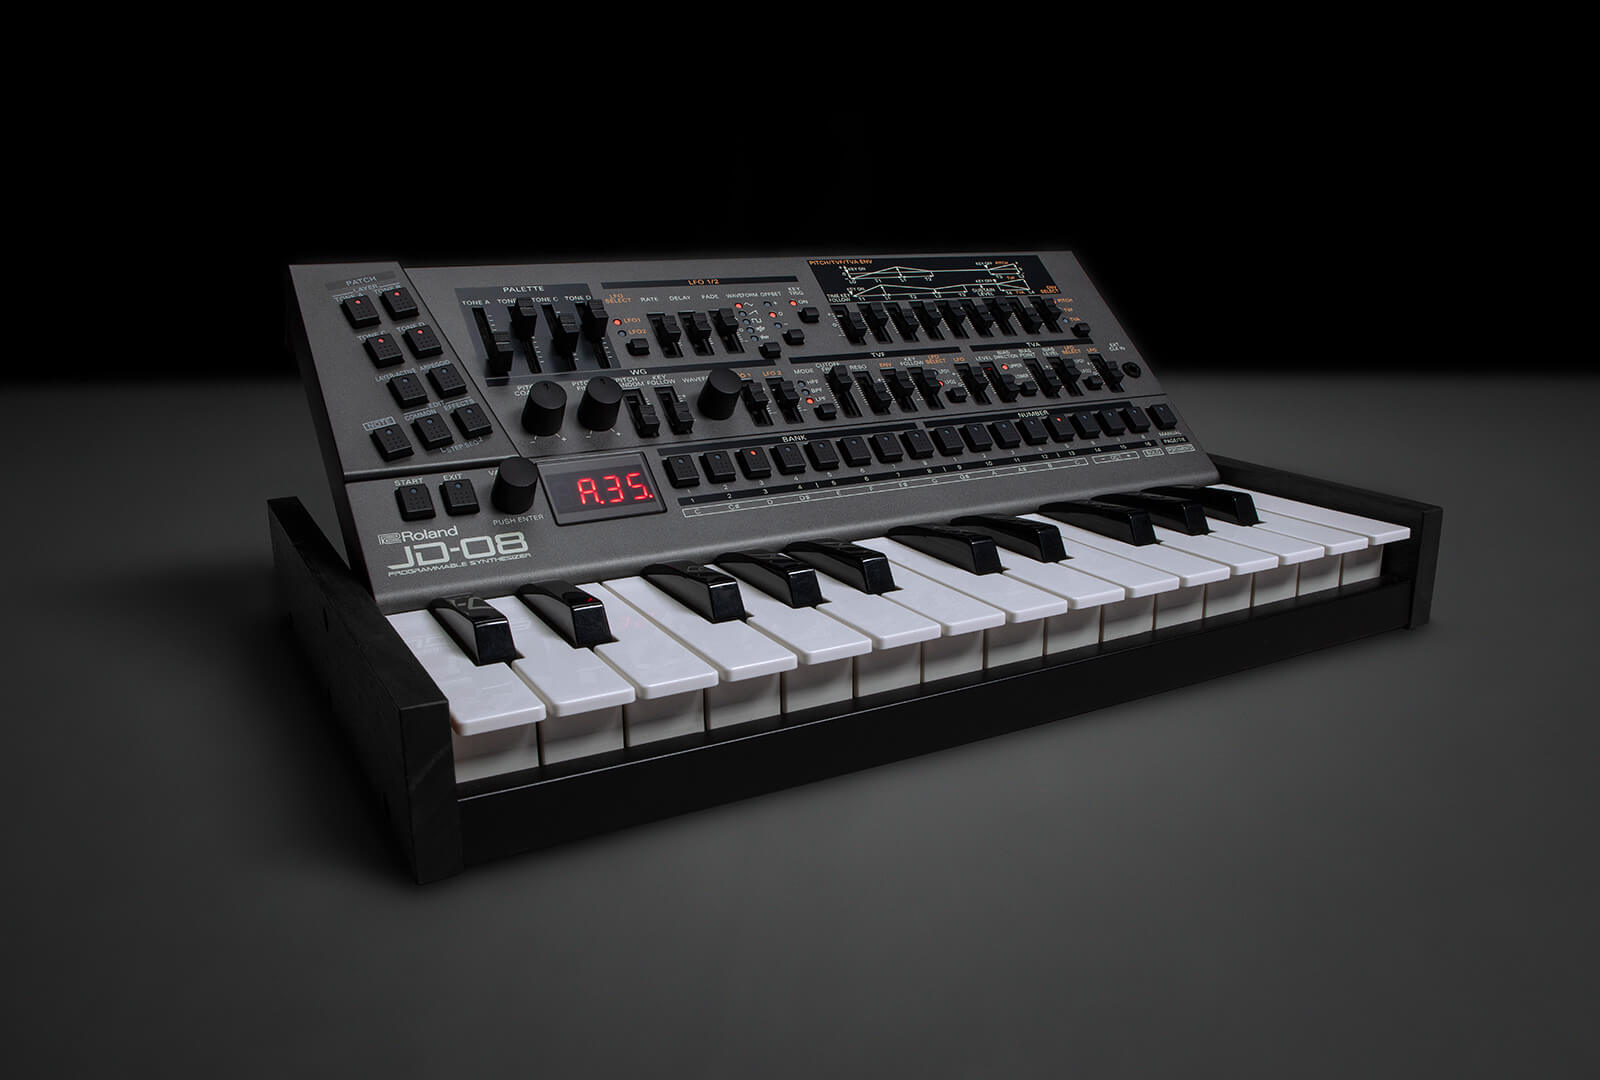 A Brief Story of the Roland TB -303 Bassline Synthesizer 